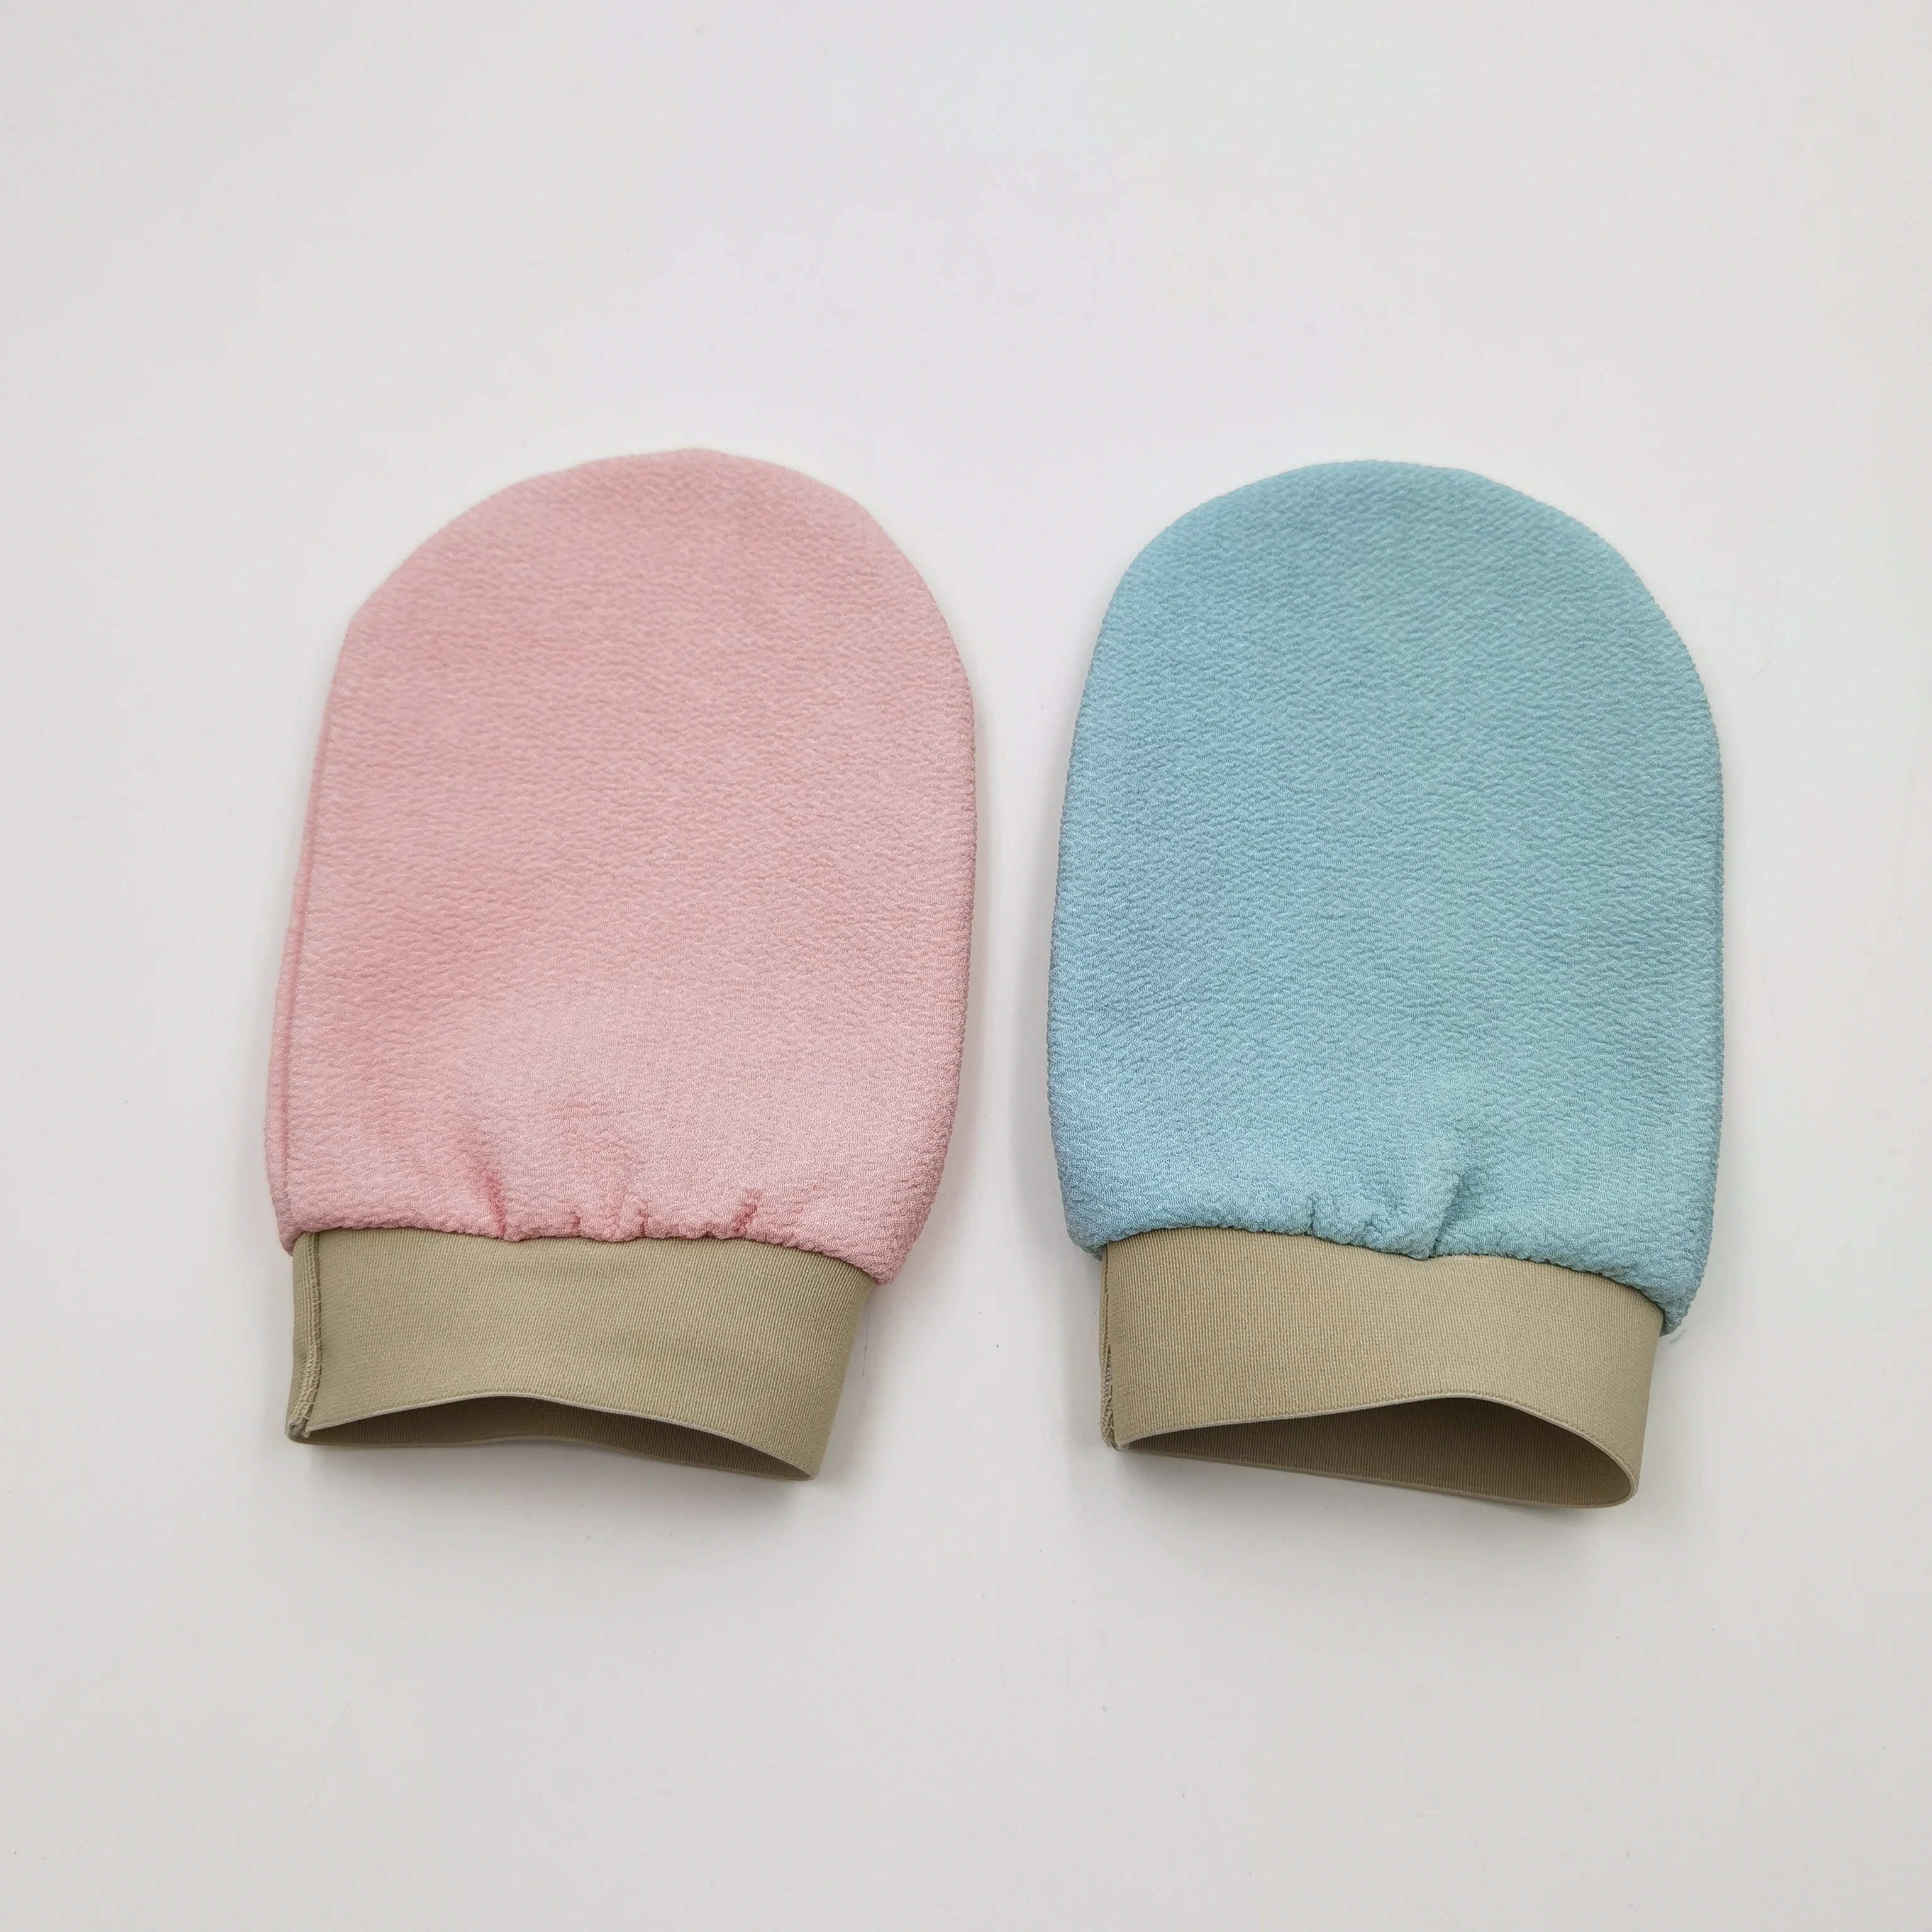 

Viscose Rayon Polyester Hammam mitt With Package Hook Exfoliating Bath Glove Pink Korean exfoliate Shower Scrubber Glove, As shown in the picture